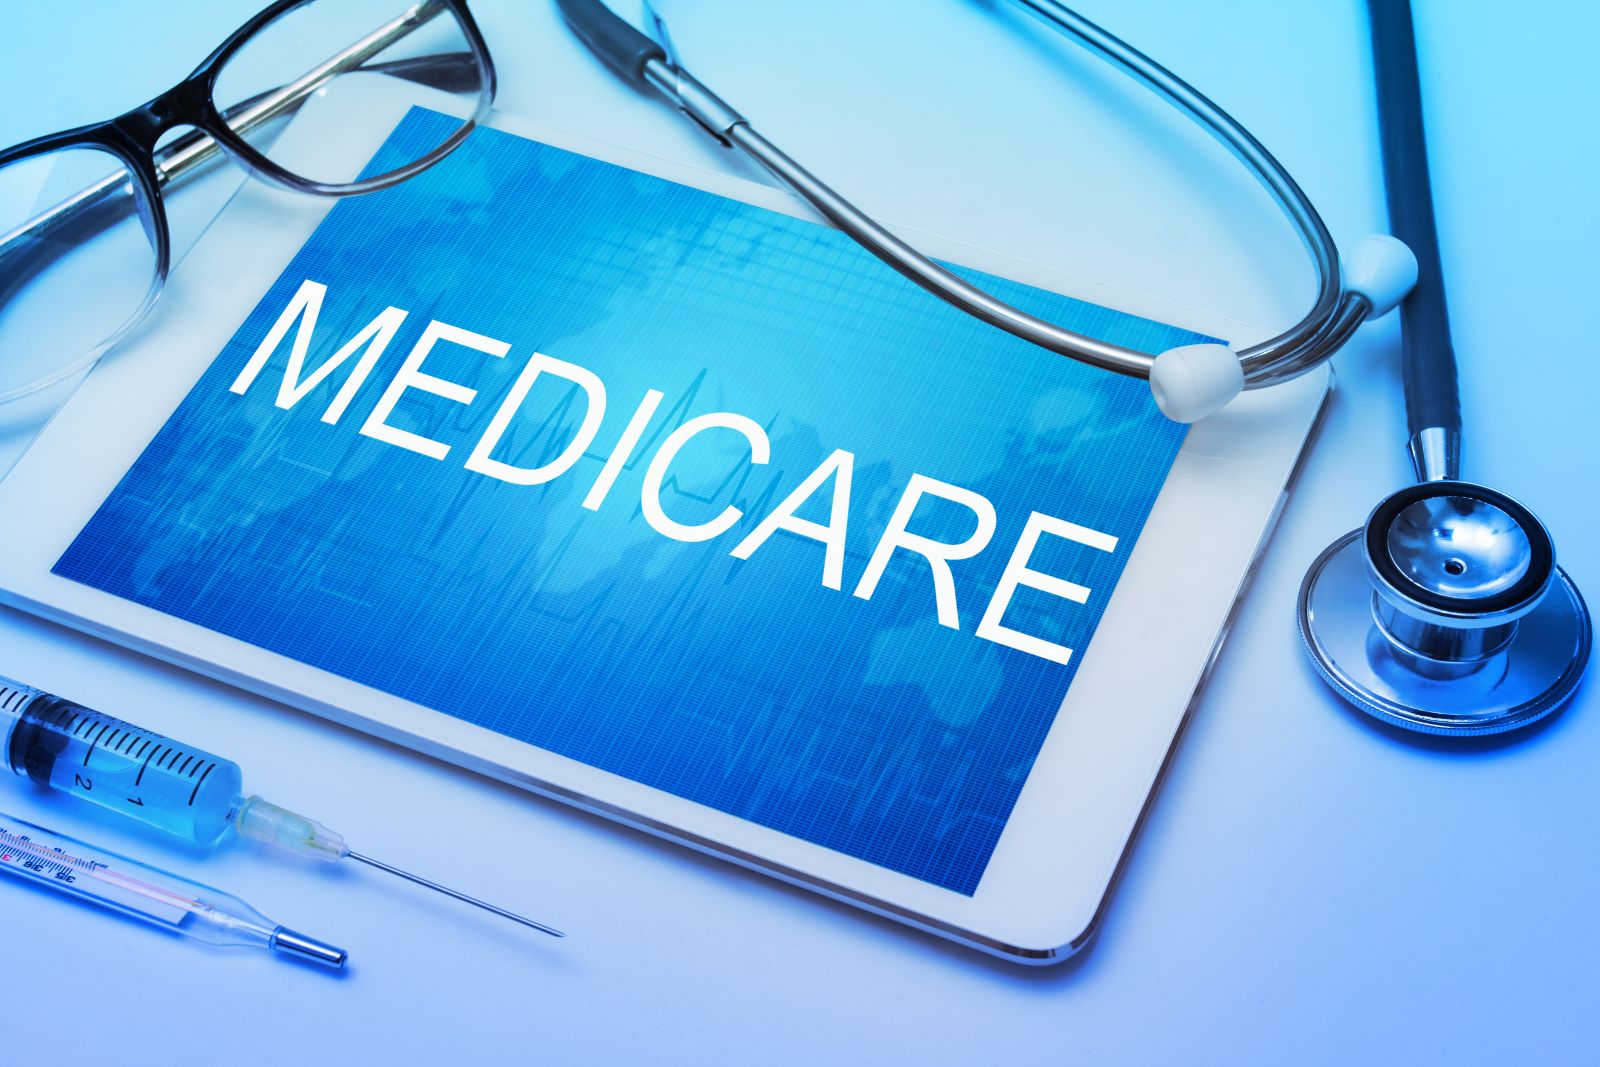 <p class="wp-caption-text">Image Credit: Shutterstock / ilikestudio</p>  <p>Understanding the nuances of Medicare is crucial. While traveling within the U.S., most services are covered. However, venturing internationally? Medicare coverage often vanishes, making supplemental travel insurance a must-have to cover unexpected medical expenses.</p>